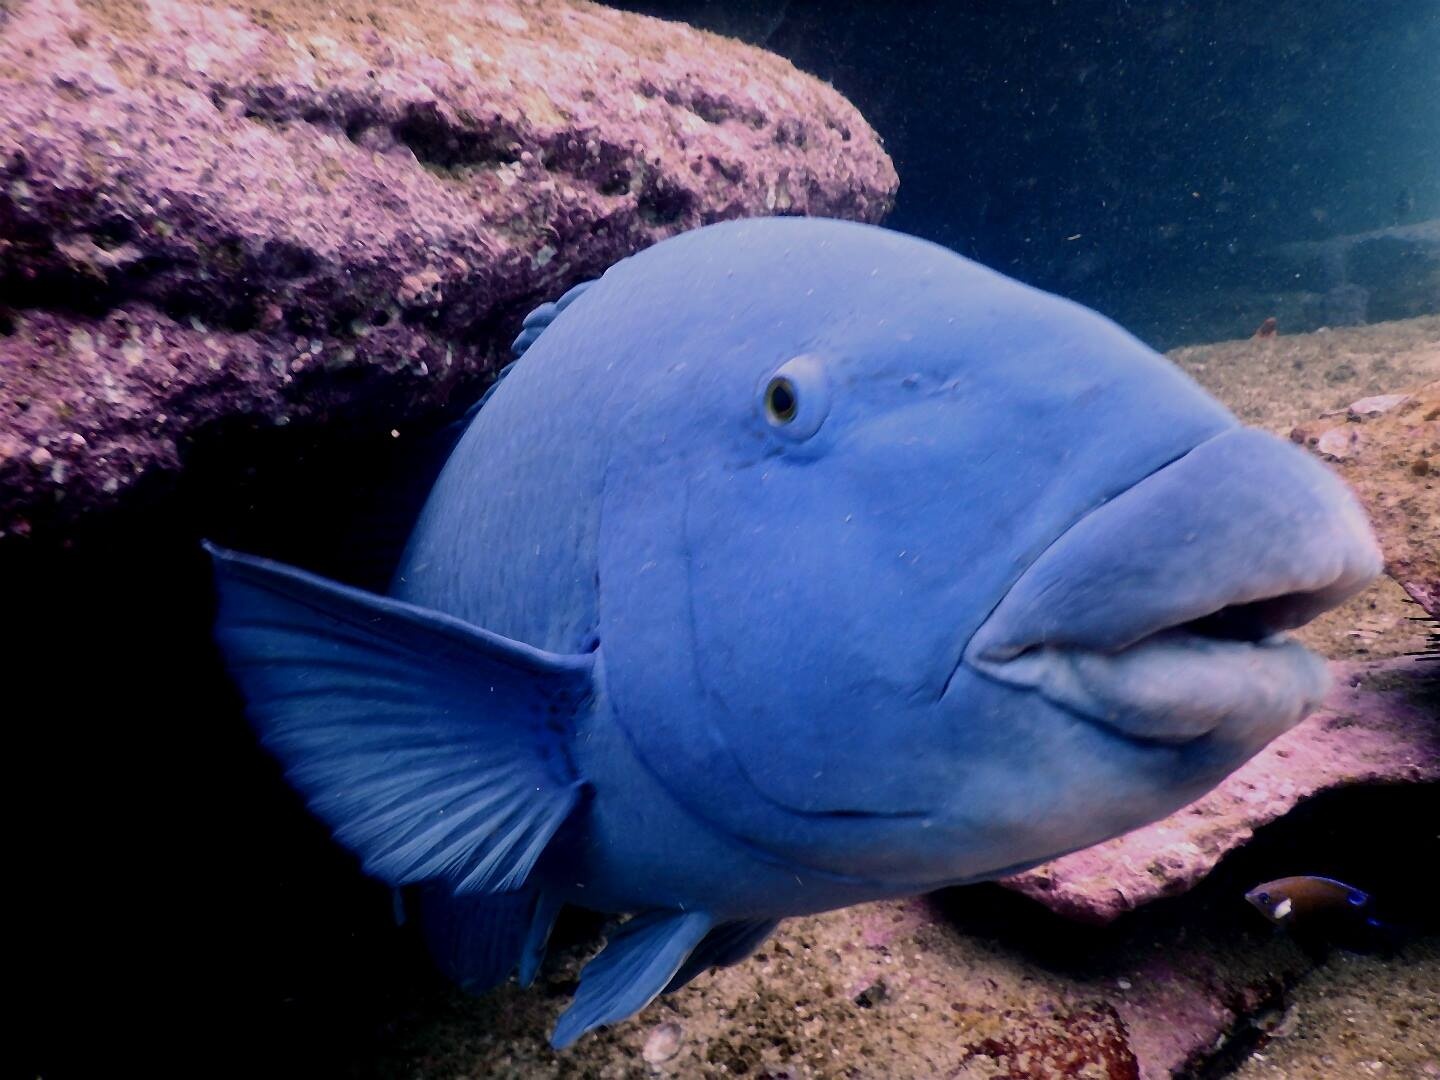 Killing of iconic blue fish angers divers